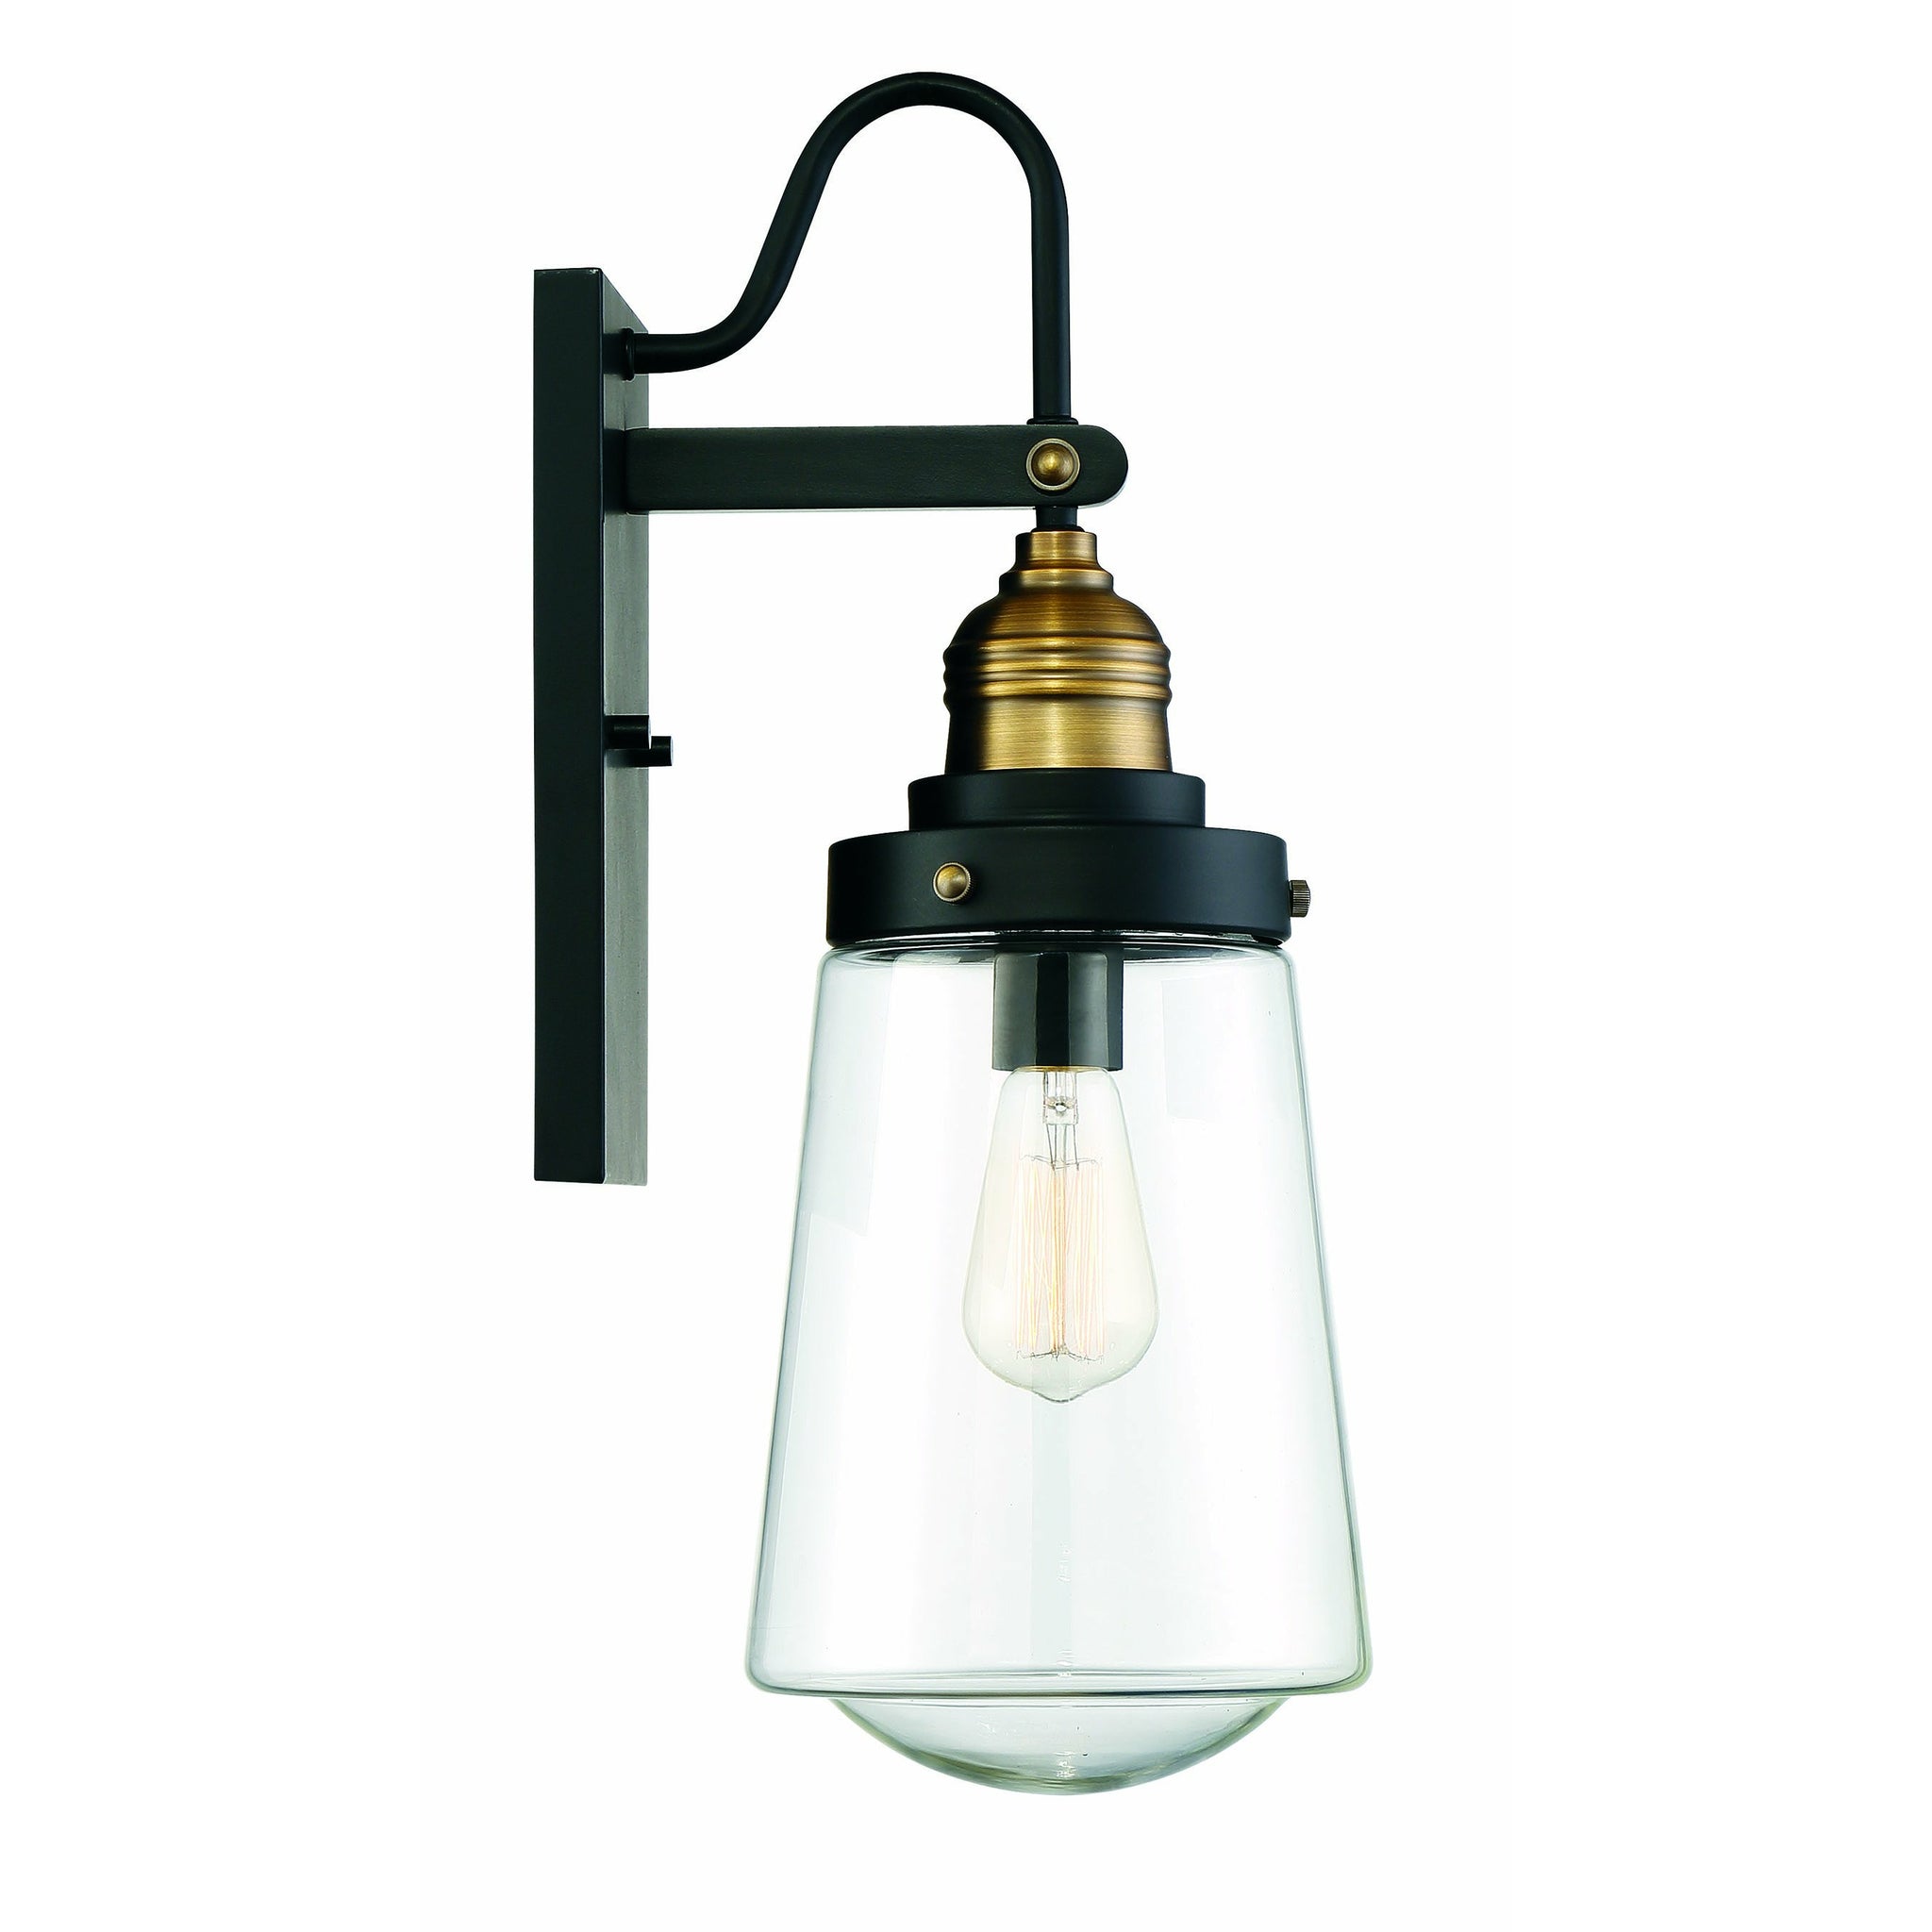 Macauley Outdoor Wall Light Vintage Black with Warm Brass